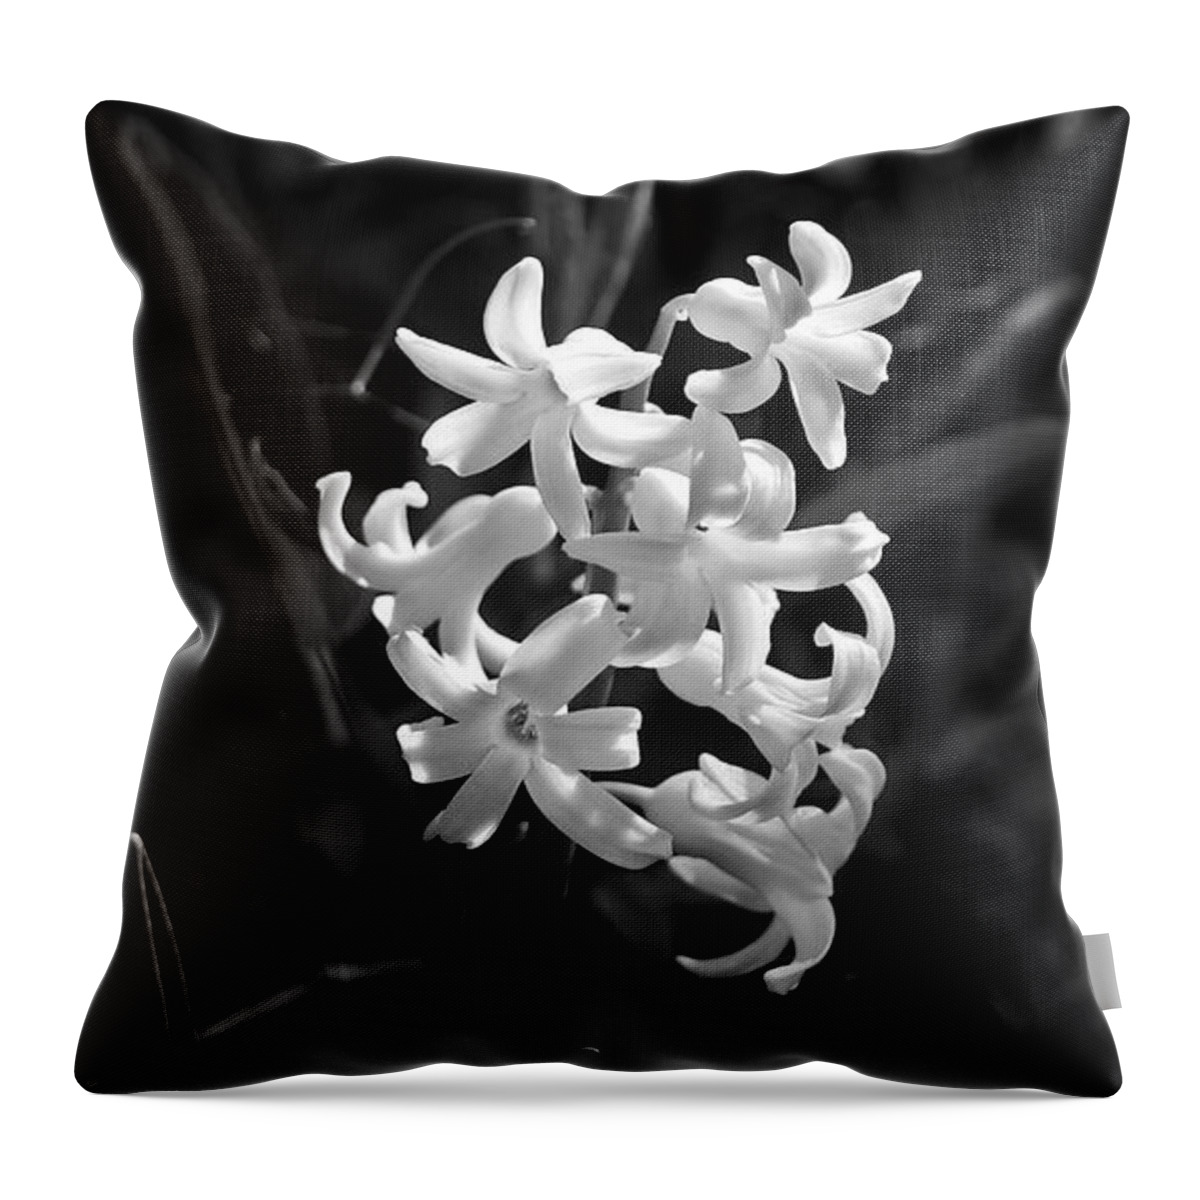 Hyacinth Throw Pillow featuring the photograph Sunlit Hyacinth by Rona Black